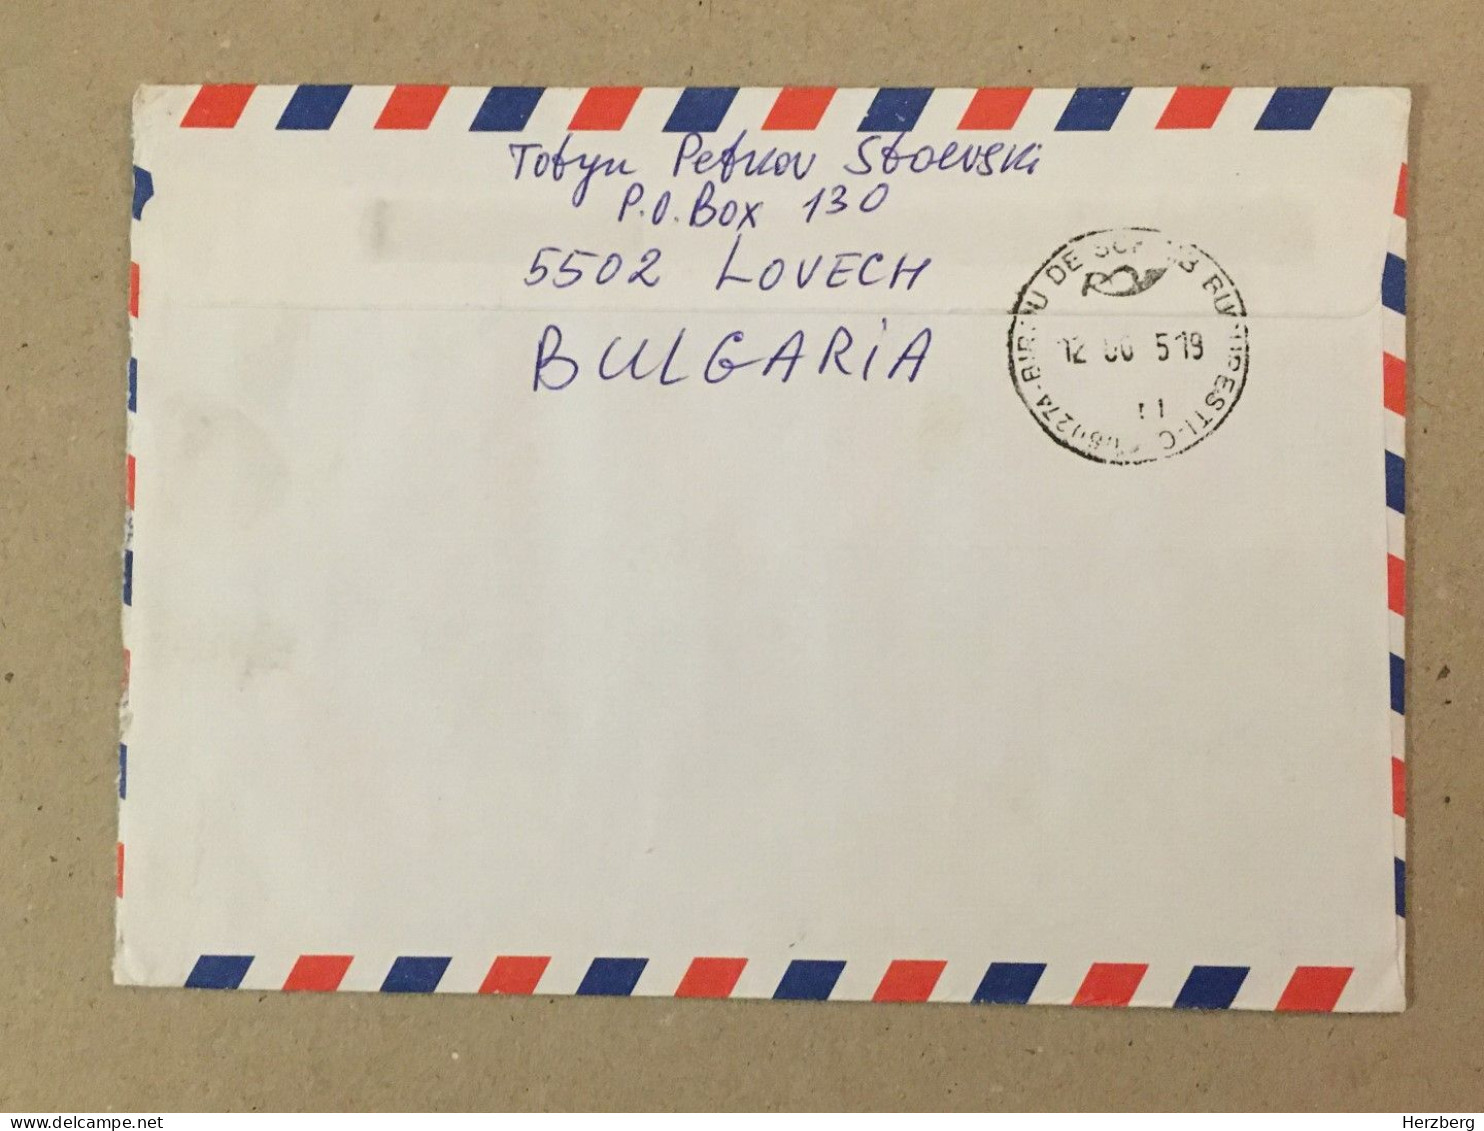 Bulgaria Used Letter Stamp Cover Registered Barcode Label Printed Sticker 2015 - Covers & Documents